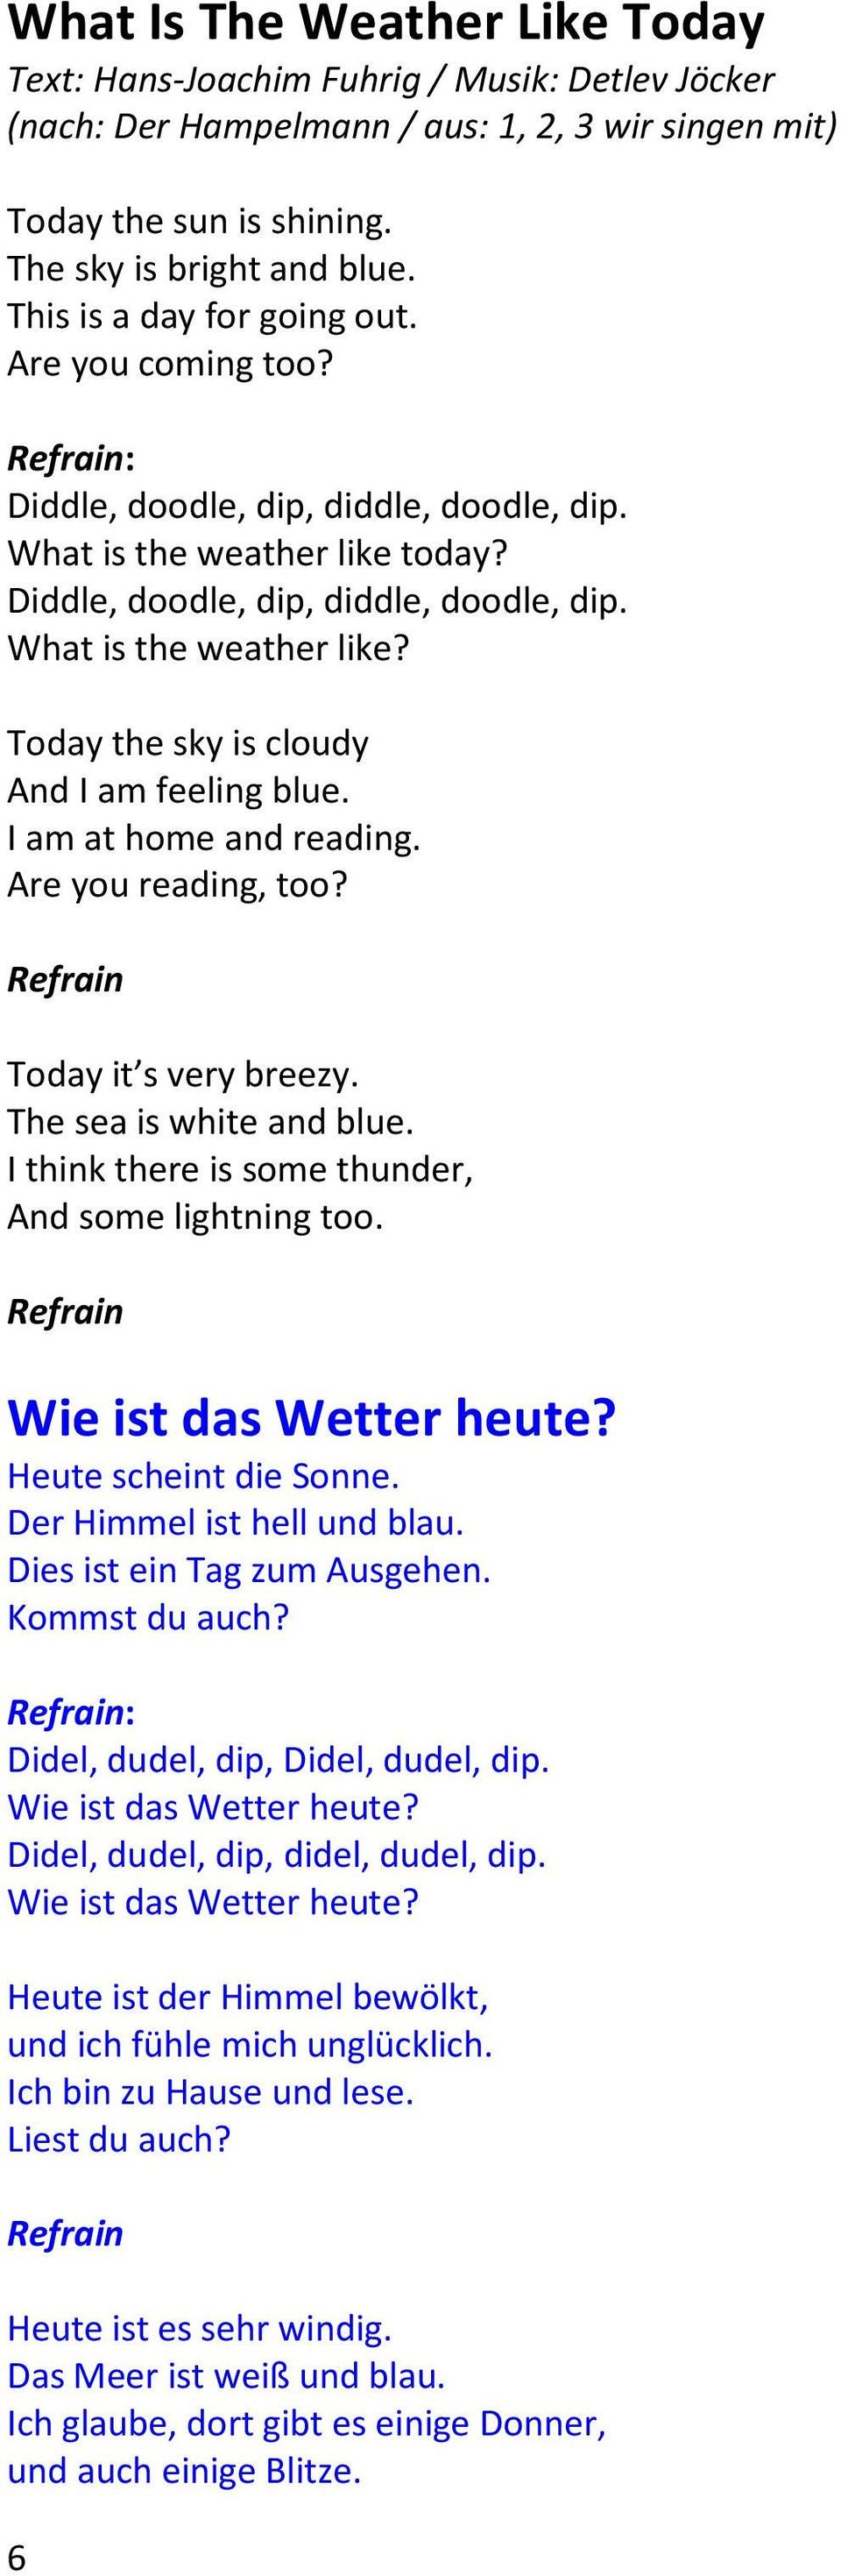 I am at home and reading. Are you reading, too? Today it s very breezy. The sea is white and blue. I think there is some thunder, And some lightning too. Wie ist das Wetter heute?